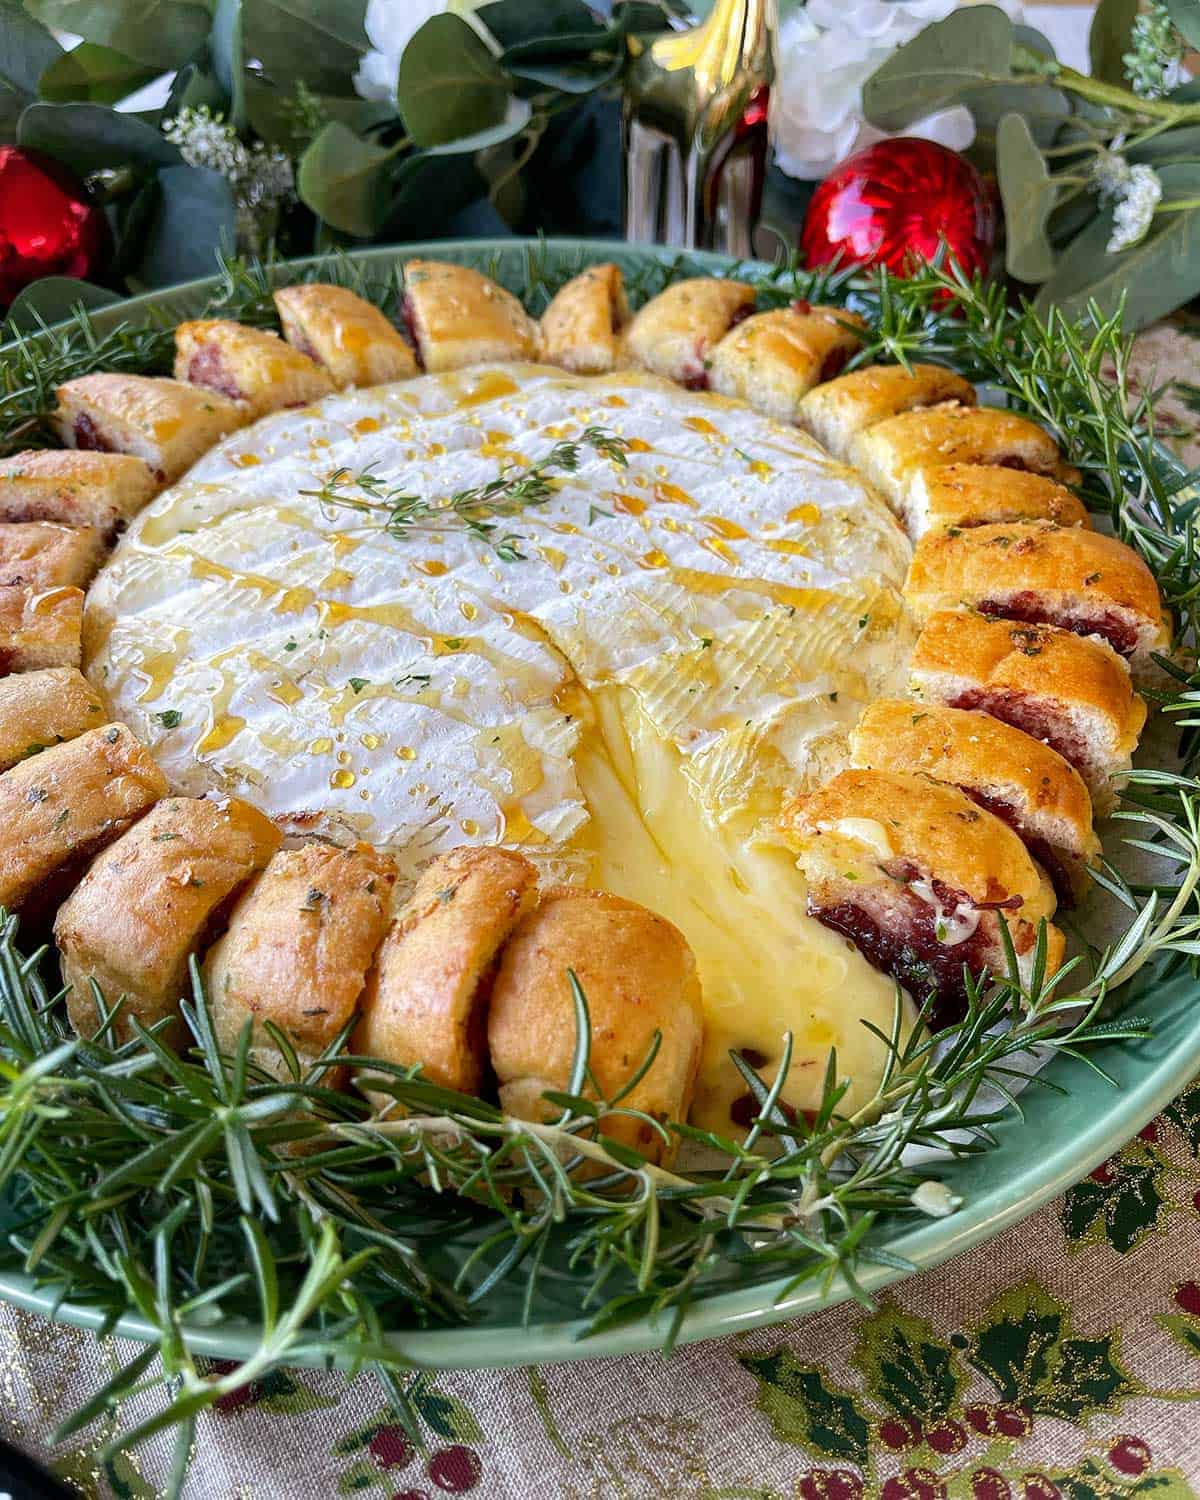 A close up of a large, cooked, brie surrounded by garlic bread on a green plate.